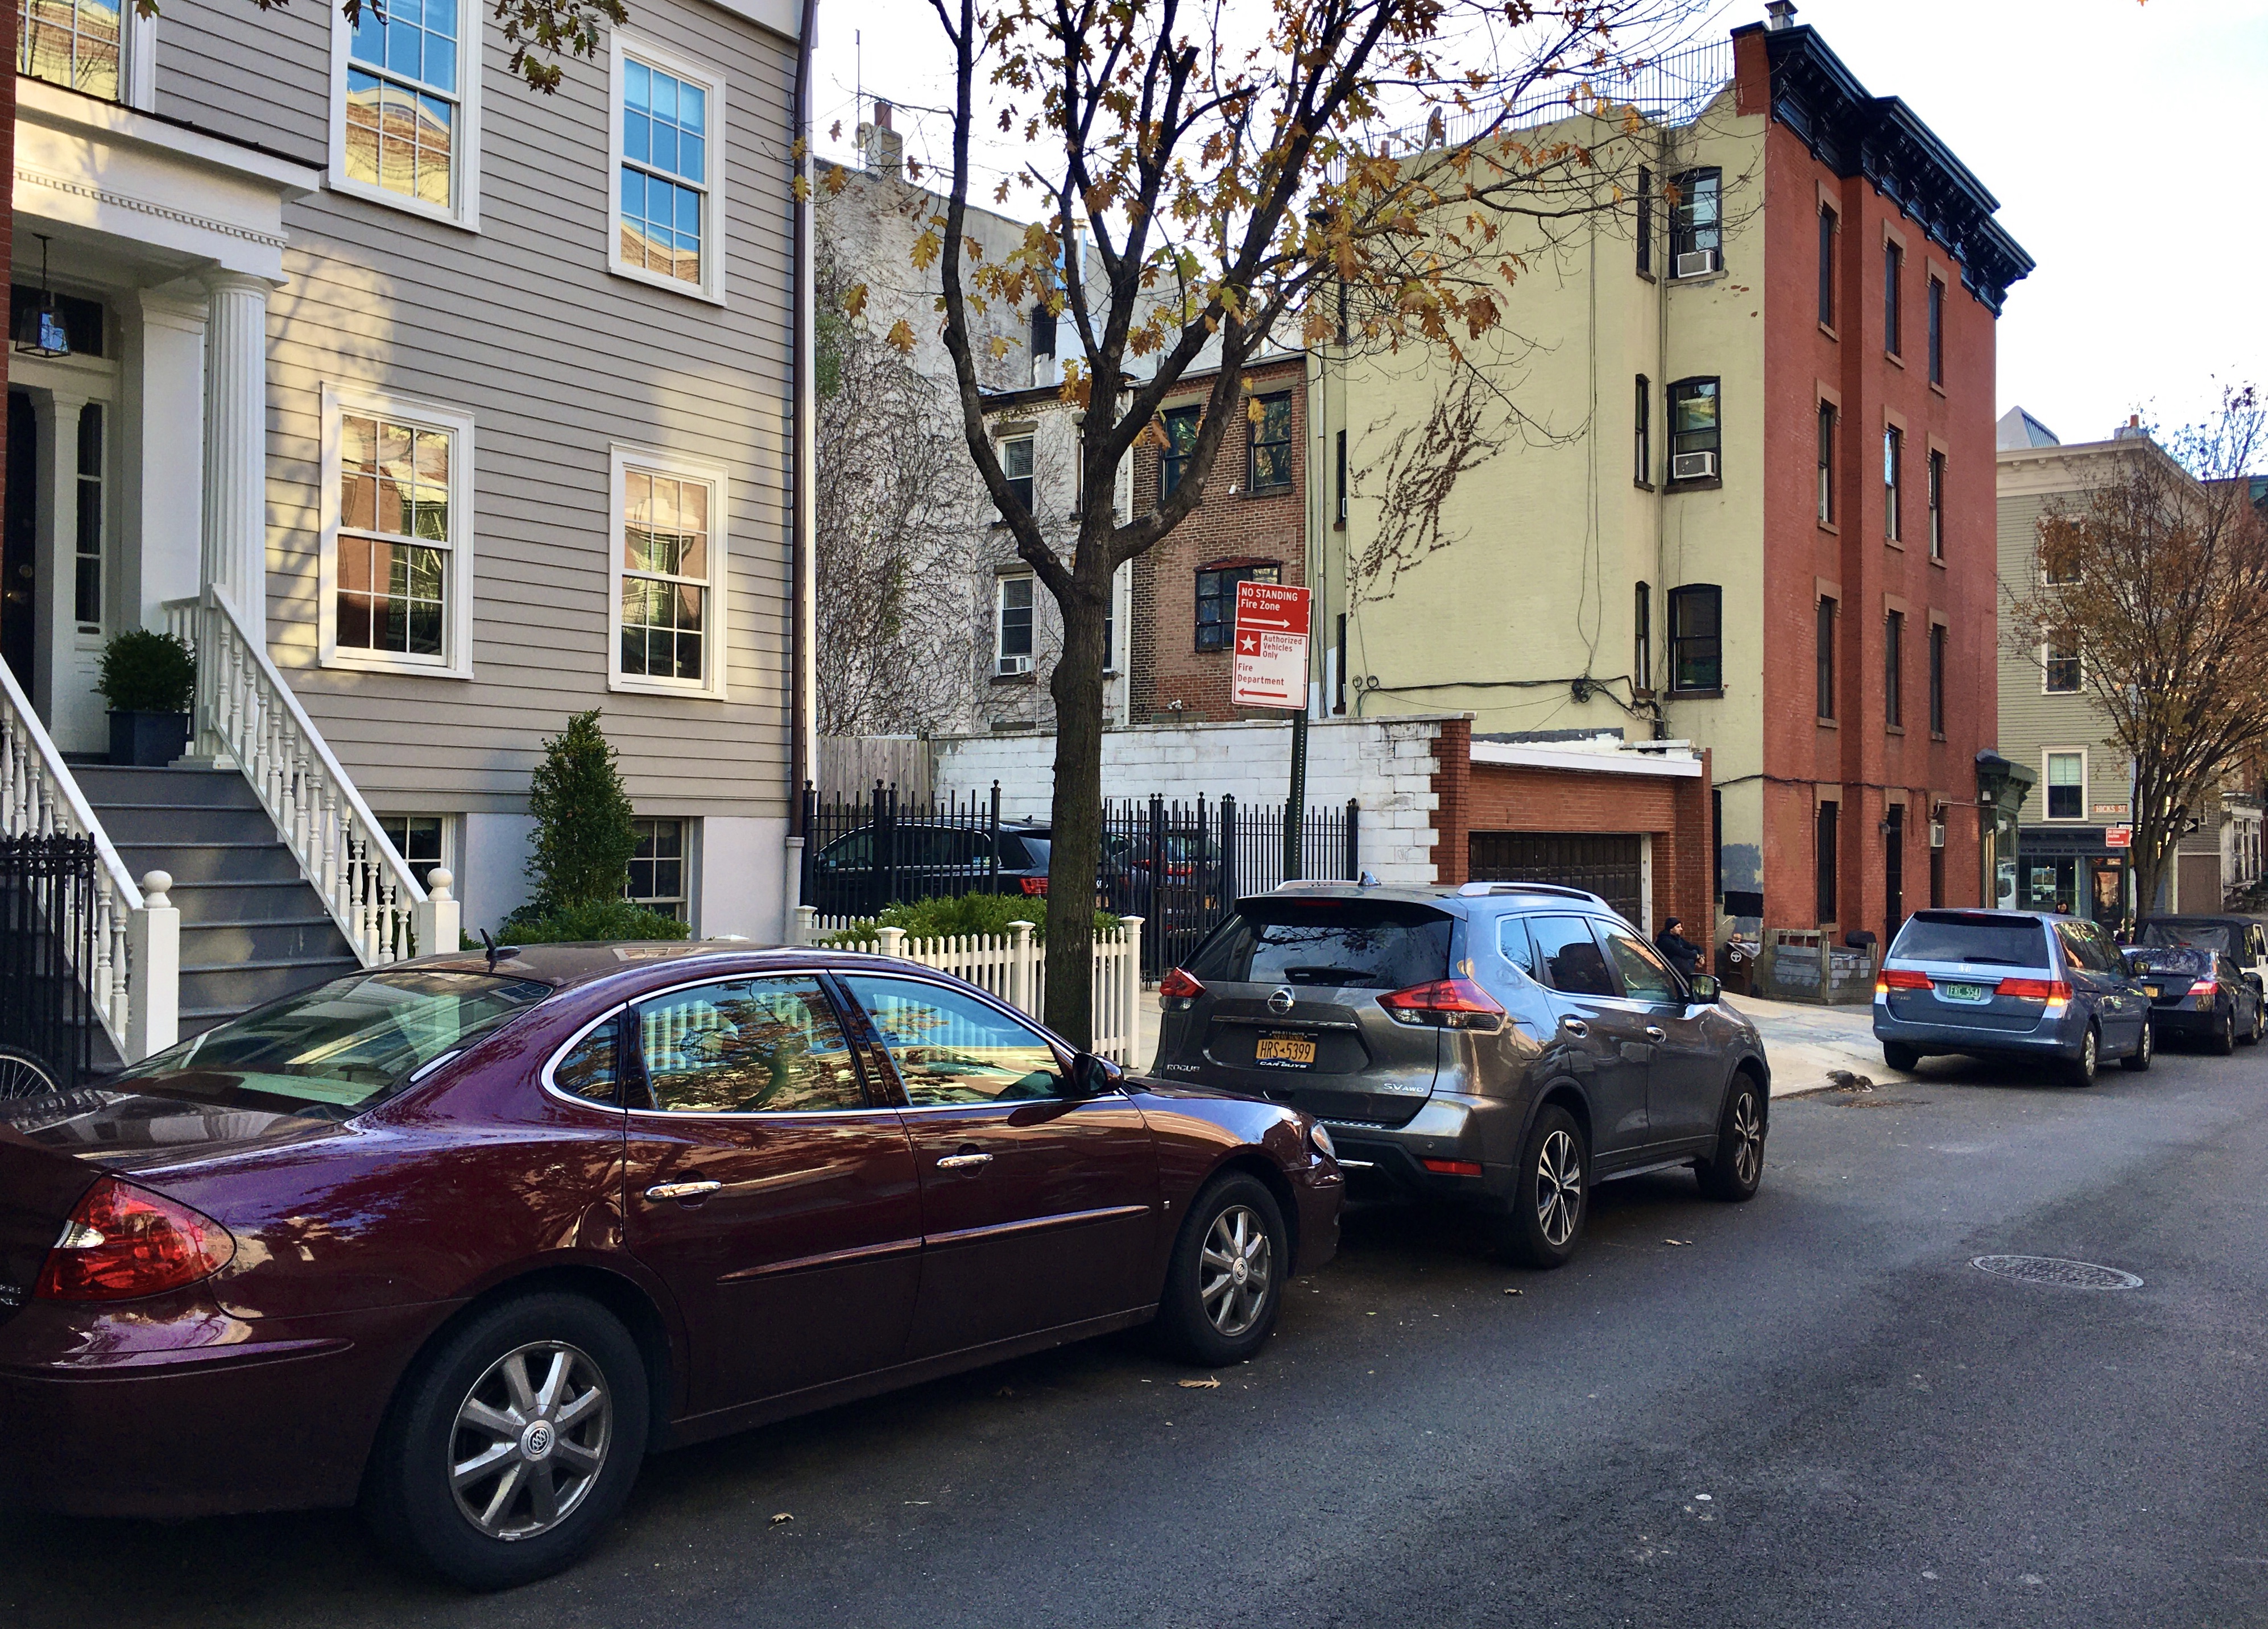 At left is the existing house at 56 Middagh St., with its parking lot where a new house will be constructed. Photo: Lore Croghan/Brooklyn Eagle